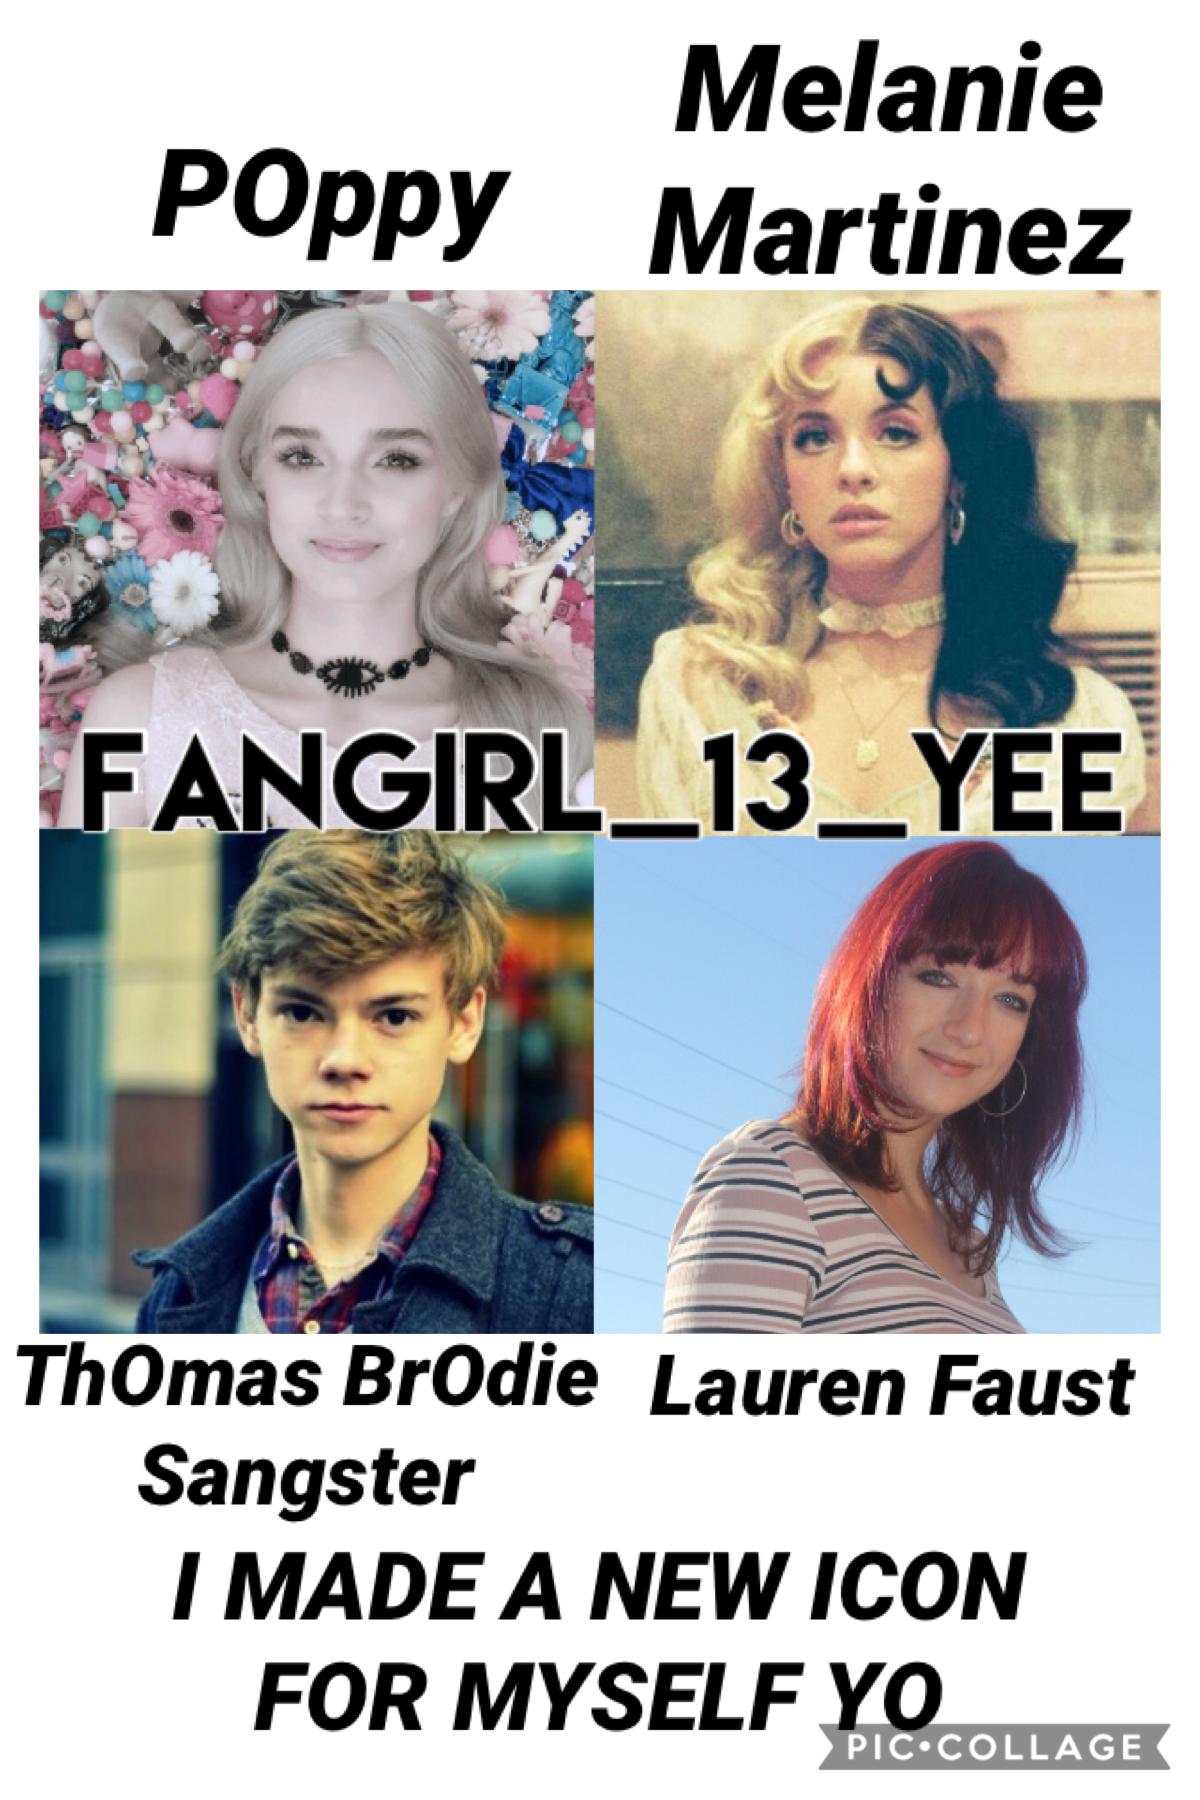 It’s my favOrite peOple :P I wOuld Have put Tara StrOng, the actress that plays Twilight Sparkle, but I figured since I already had One actOr On it, then I wOuld put the creatOr Of the newest MLP series, Lauren Faust, instead :D